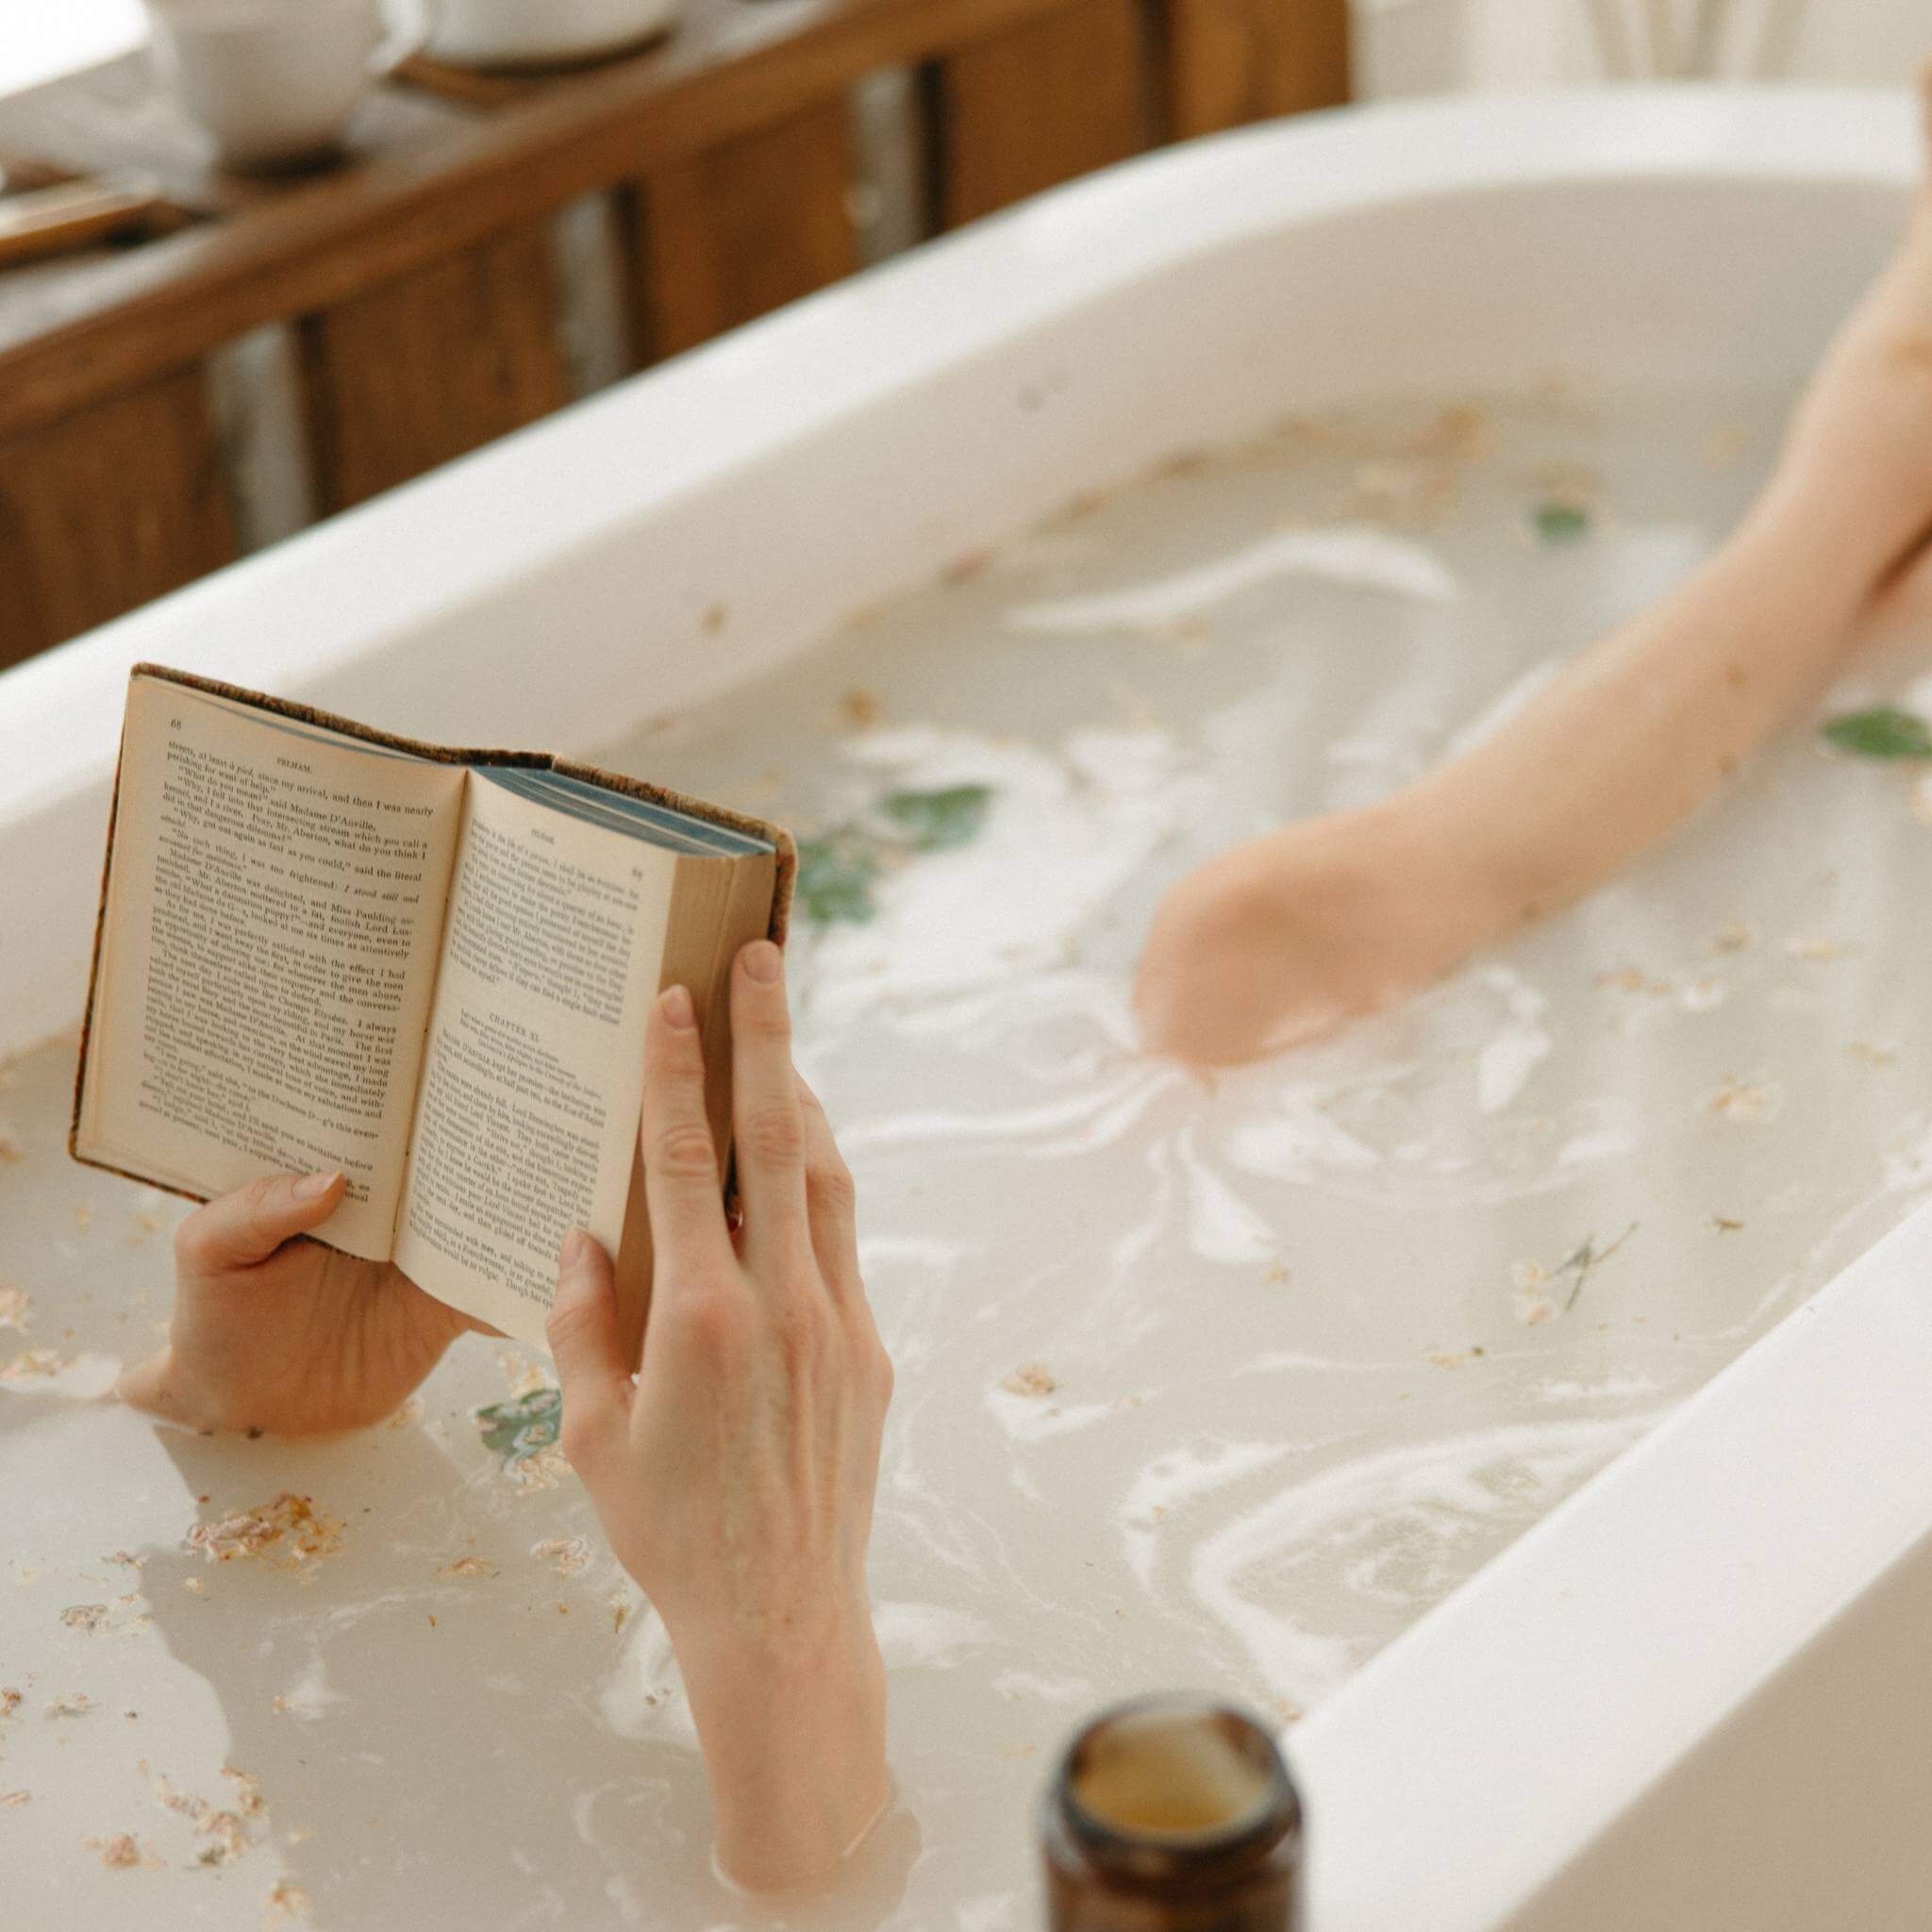 Lady reading and relaxing in the bath as part of her self-care routine